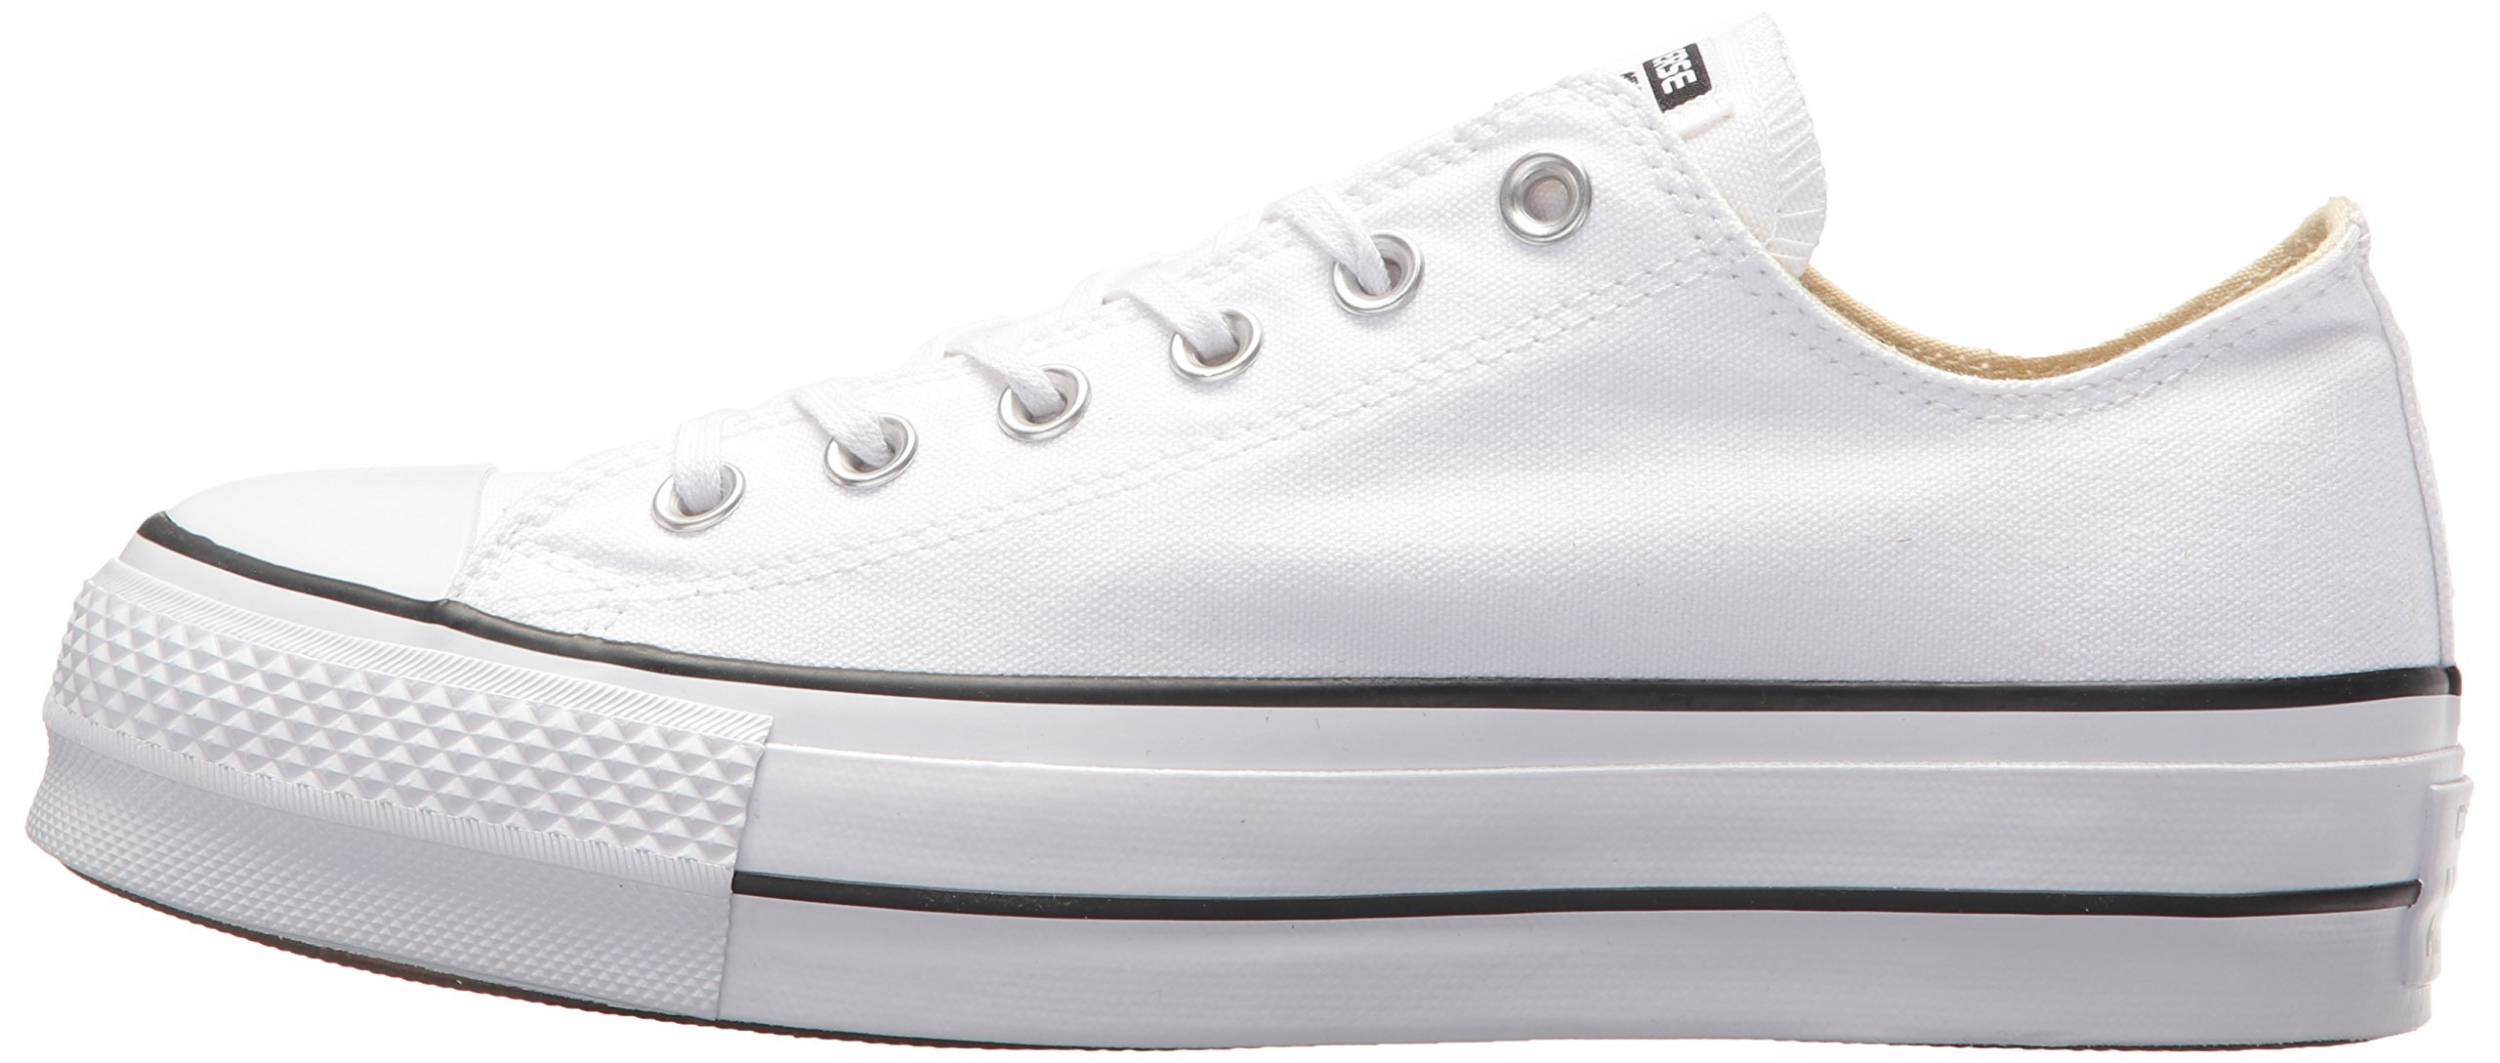 Only $59 + Review of Converse Chuck 